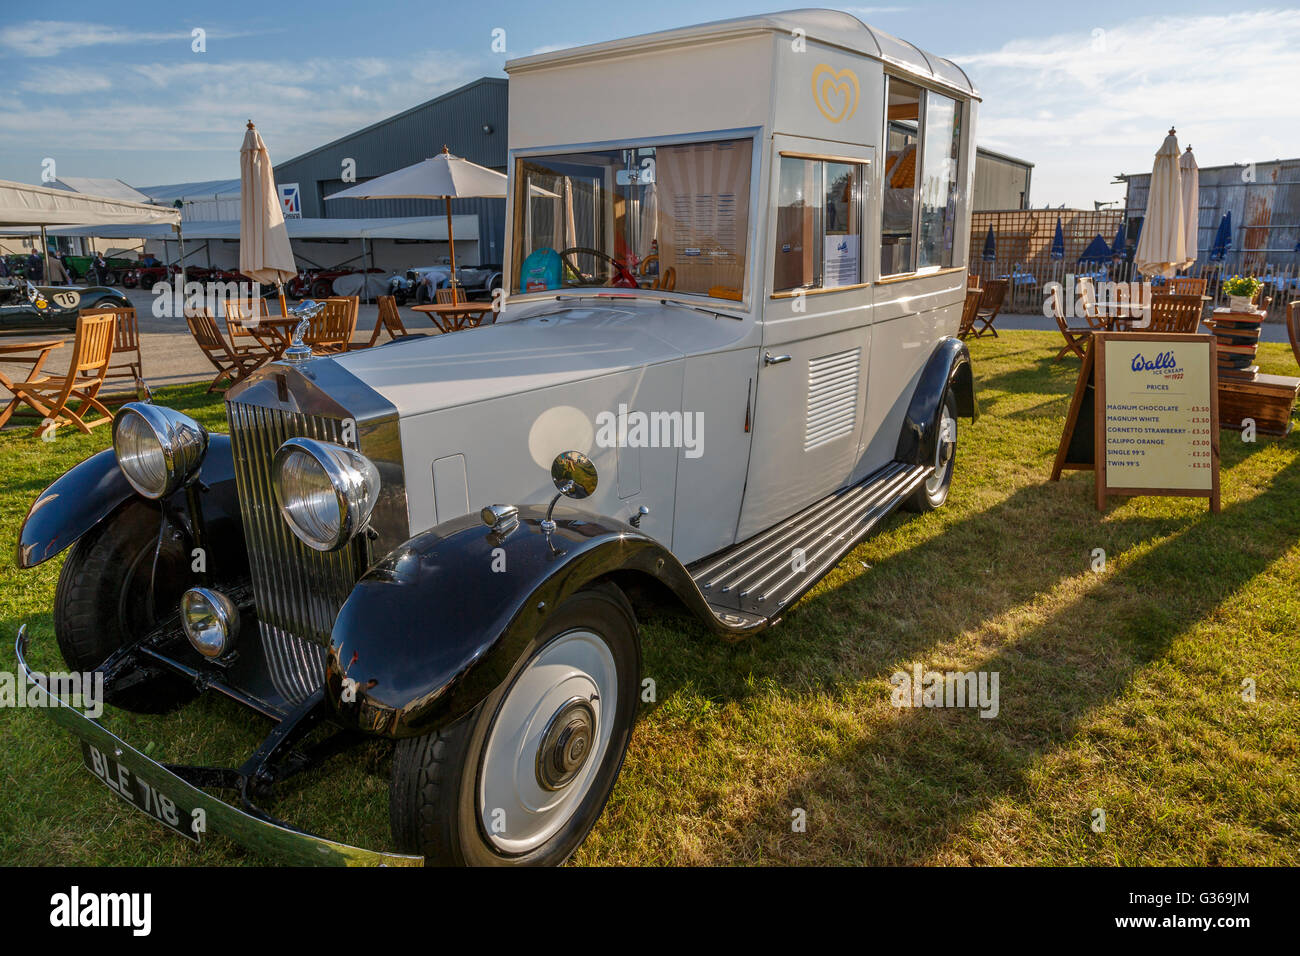 1935 Roll Royce 20/25 Tourer converted to an Ice-Cream van at the 2015 Goodwood Revival, Sussex, UK. Stock Photo